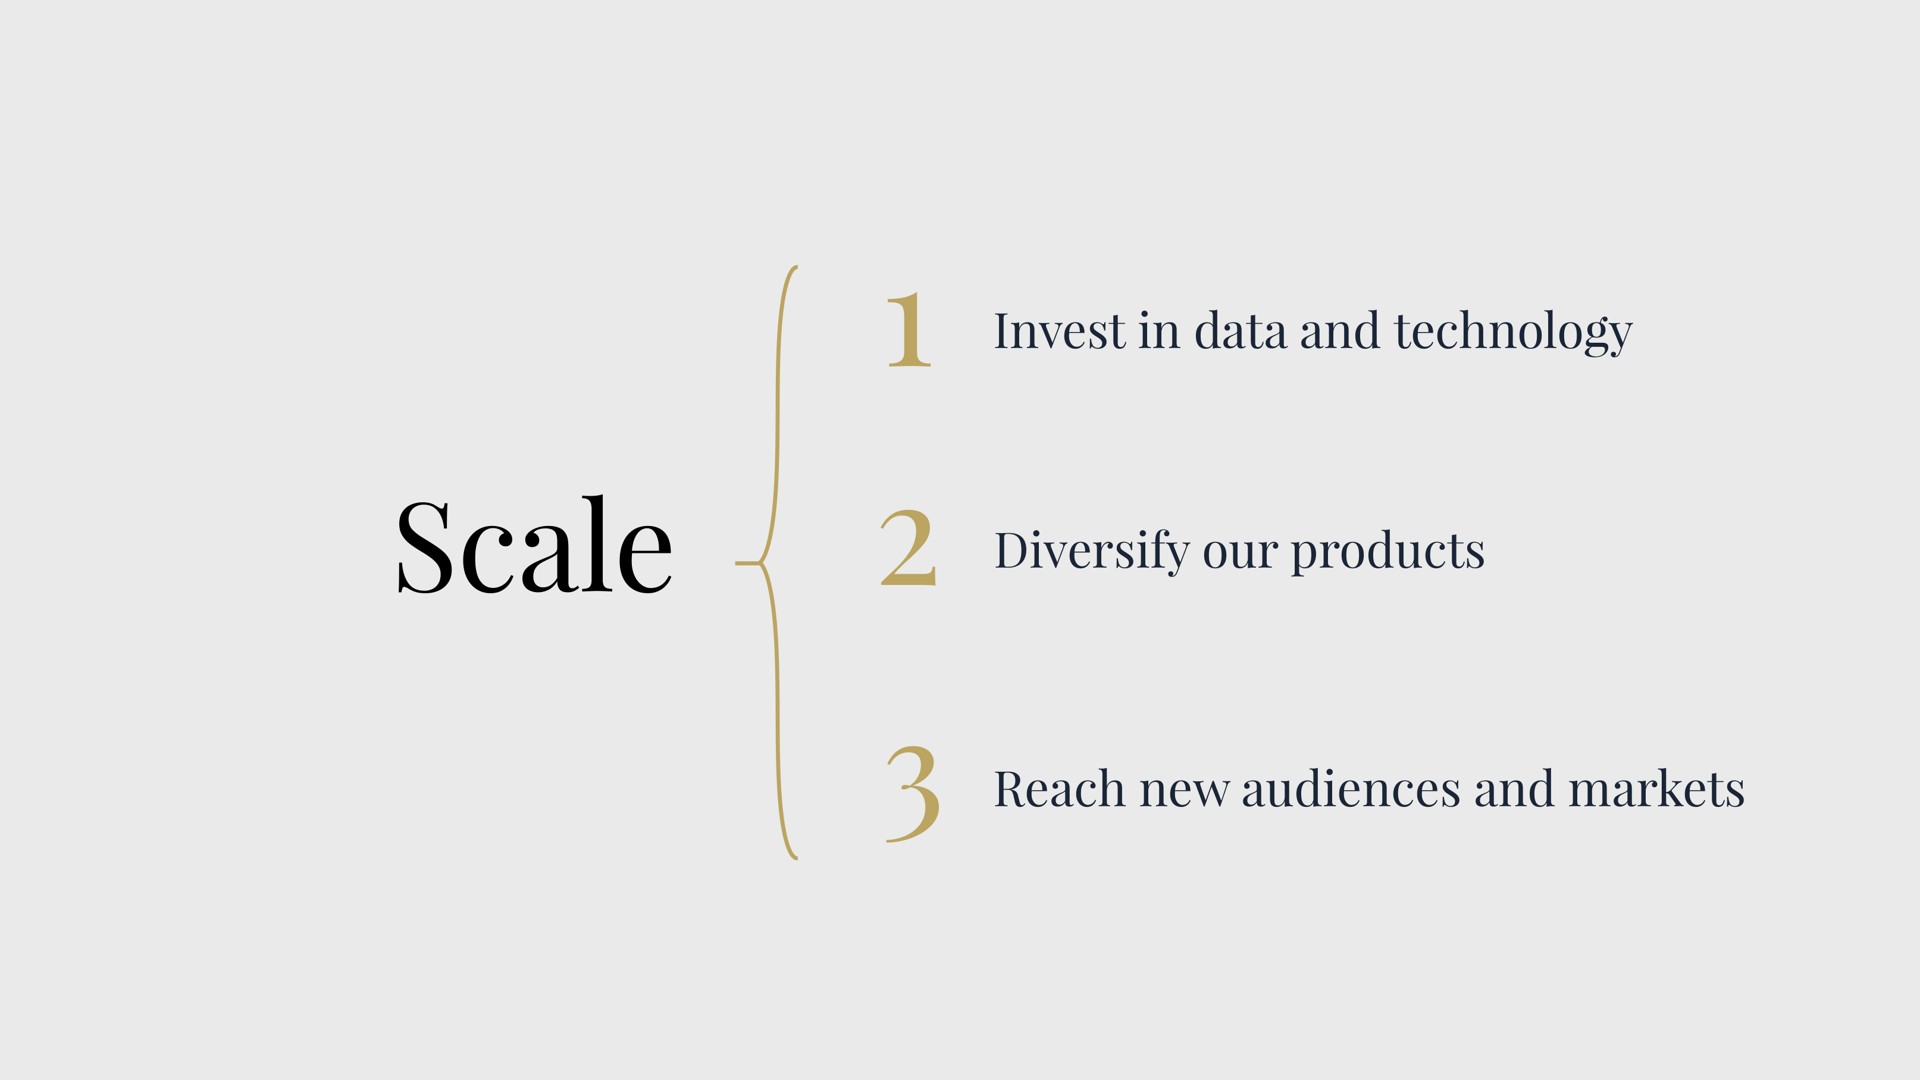 scale invest in data and technology ale diversify our products reach new audiences and markets | Dow Jones